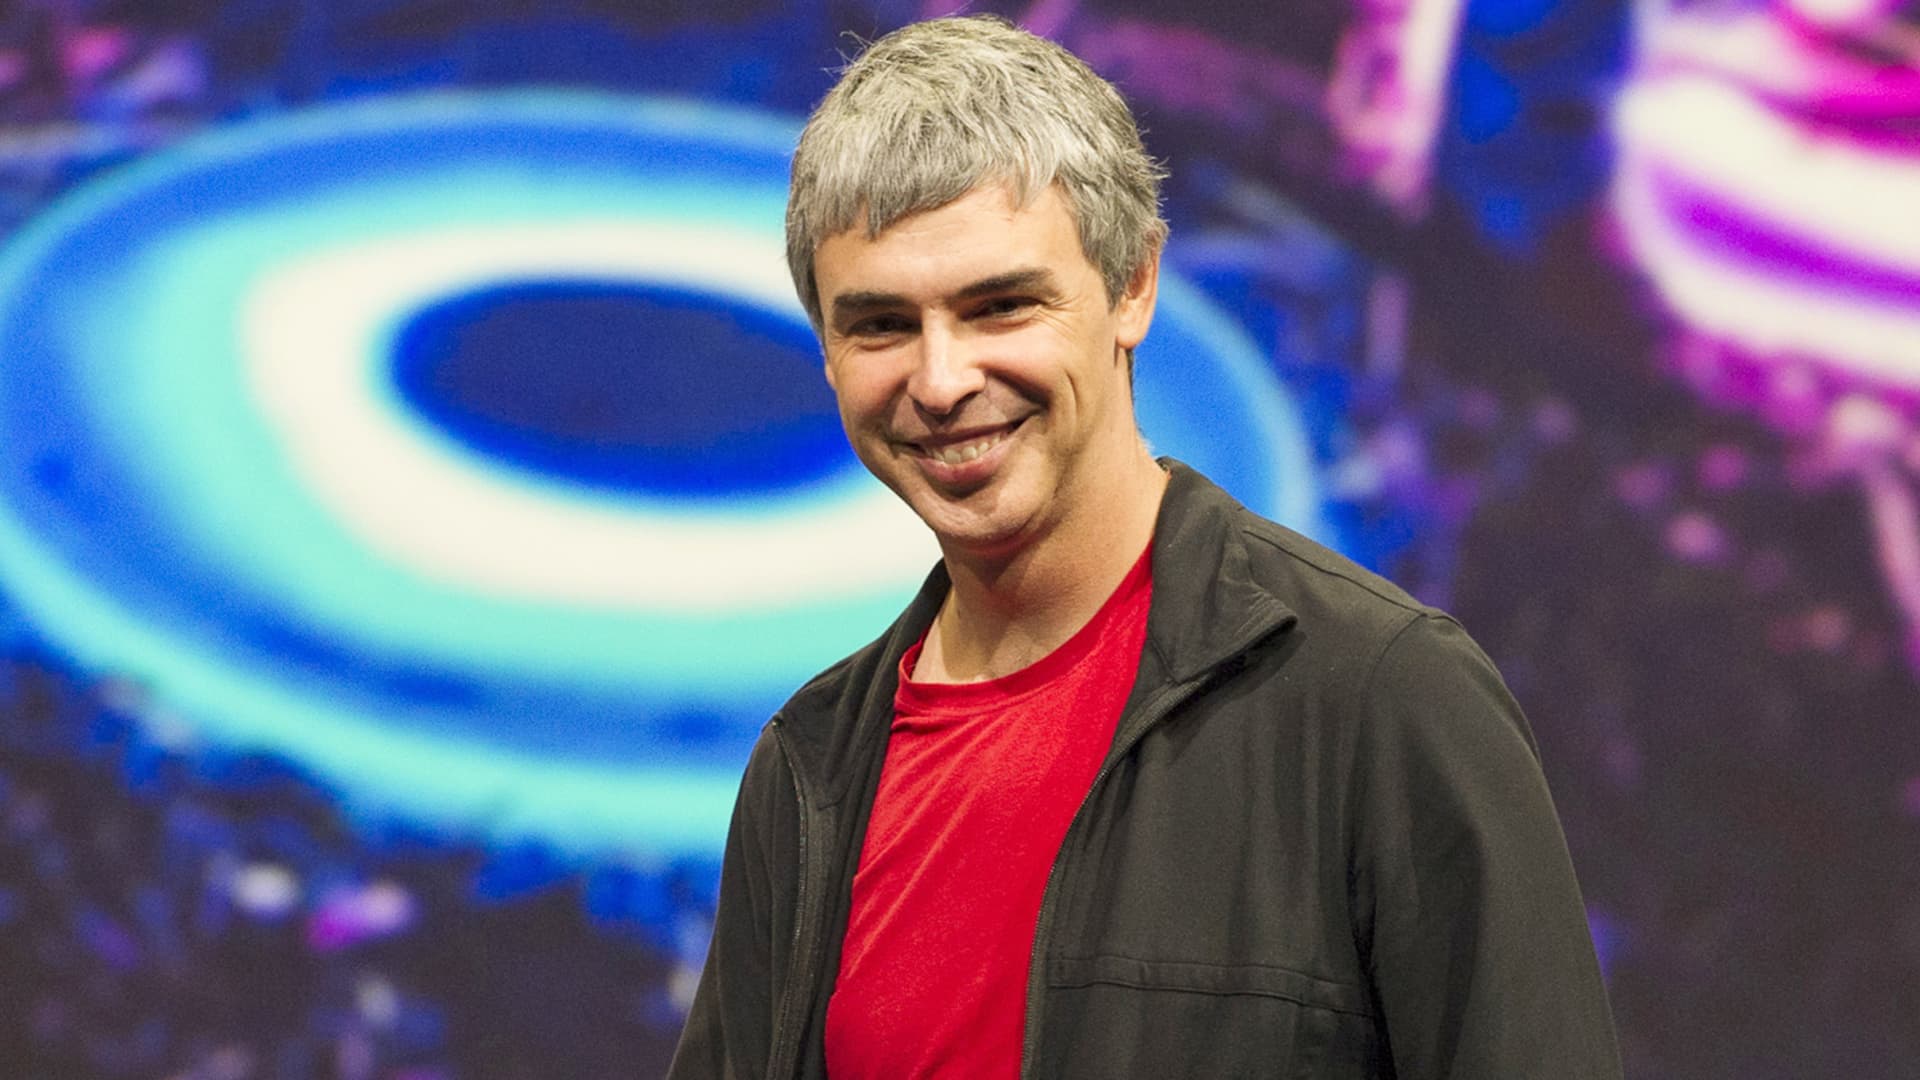 Virgin Islands issued subpoena to Google co-founder Larry Page in lawsuit against JPMorgan Chase over Jeffrey Epstein